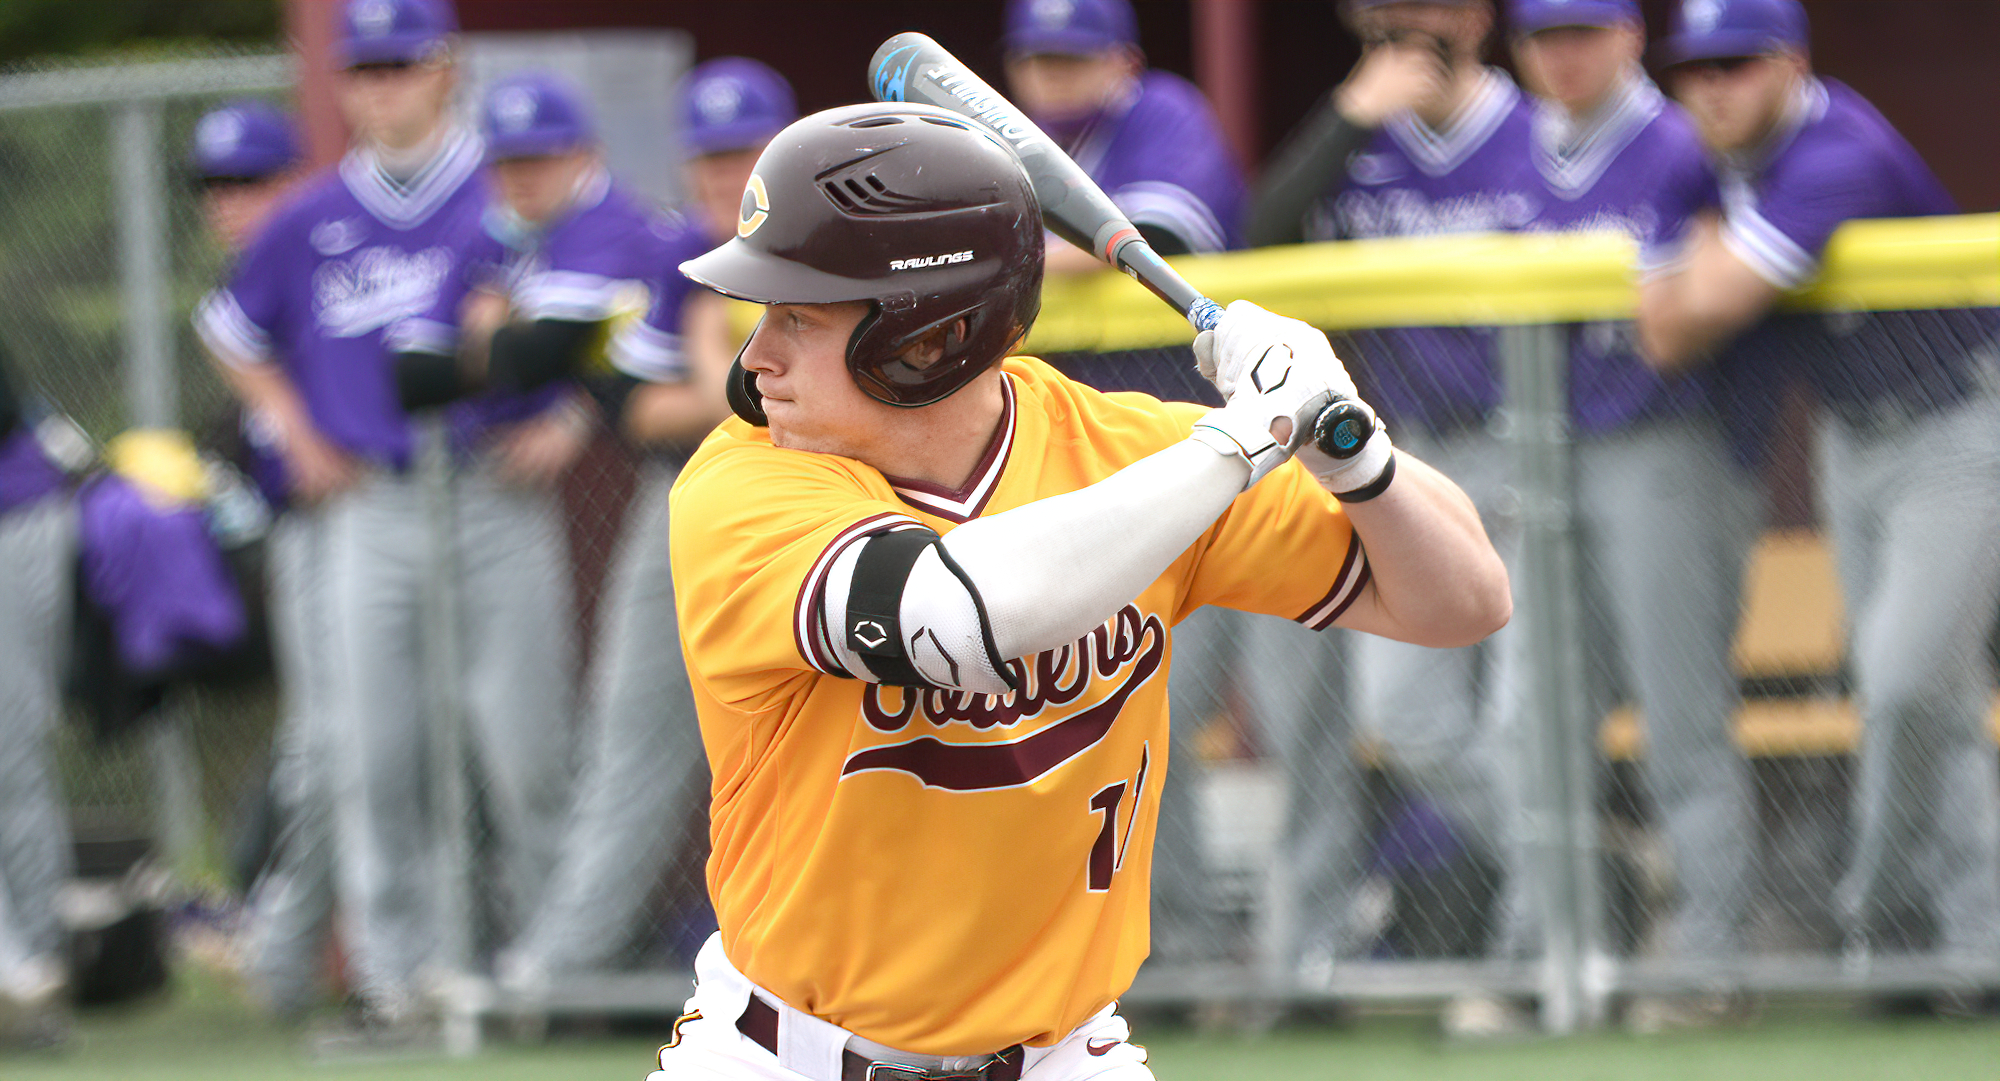 Senior Andy Gravdahl had one of the Cobbers' four hits in their game with Waynesburg. Gravdahl was 1-for-4 and has hit safely in all three games.